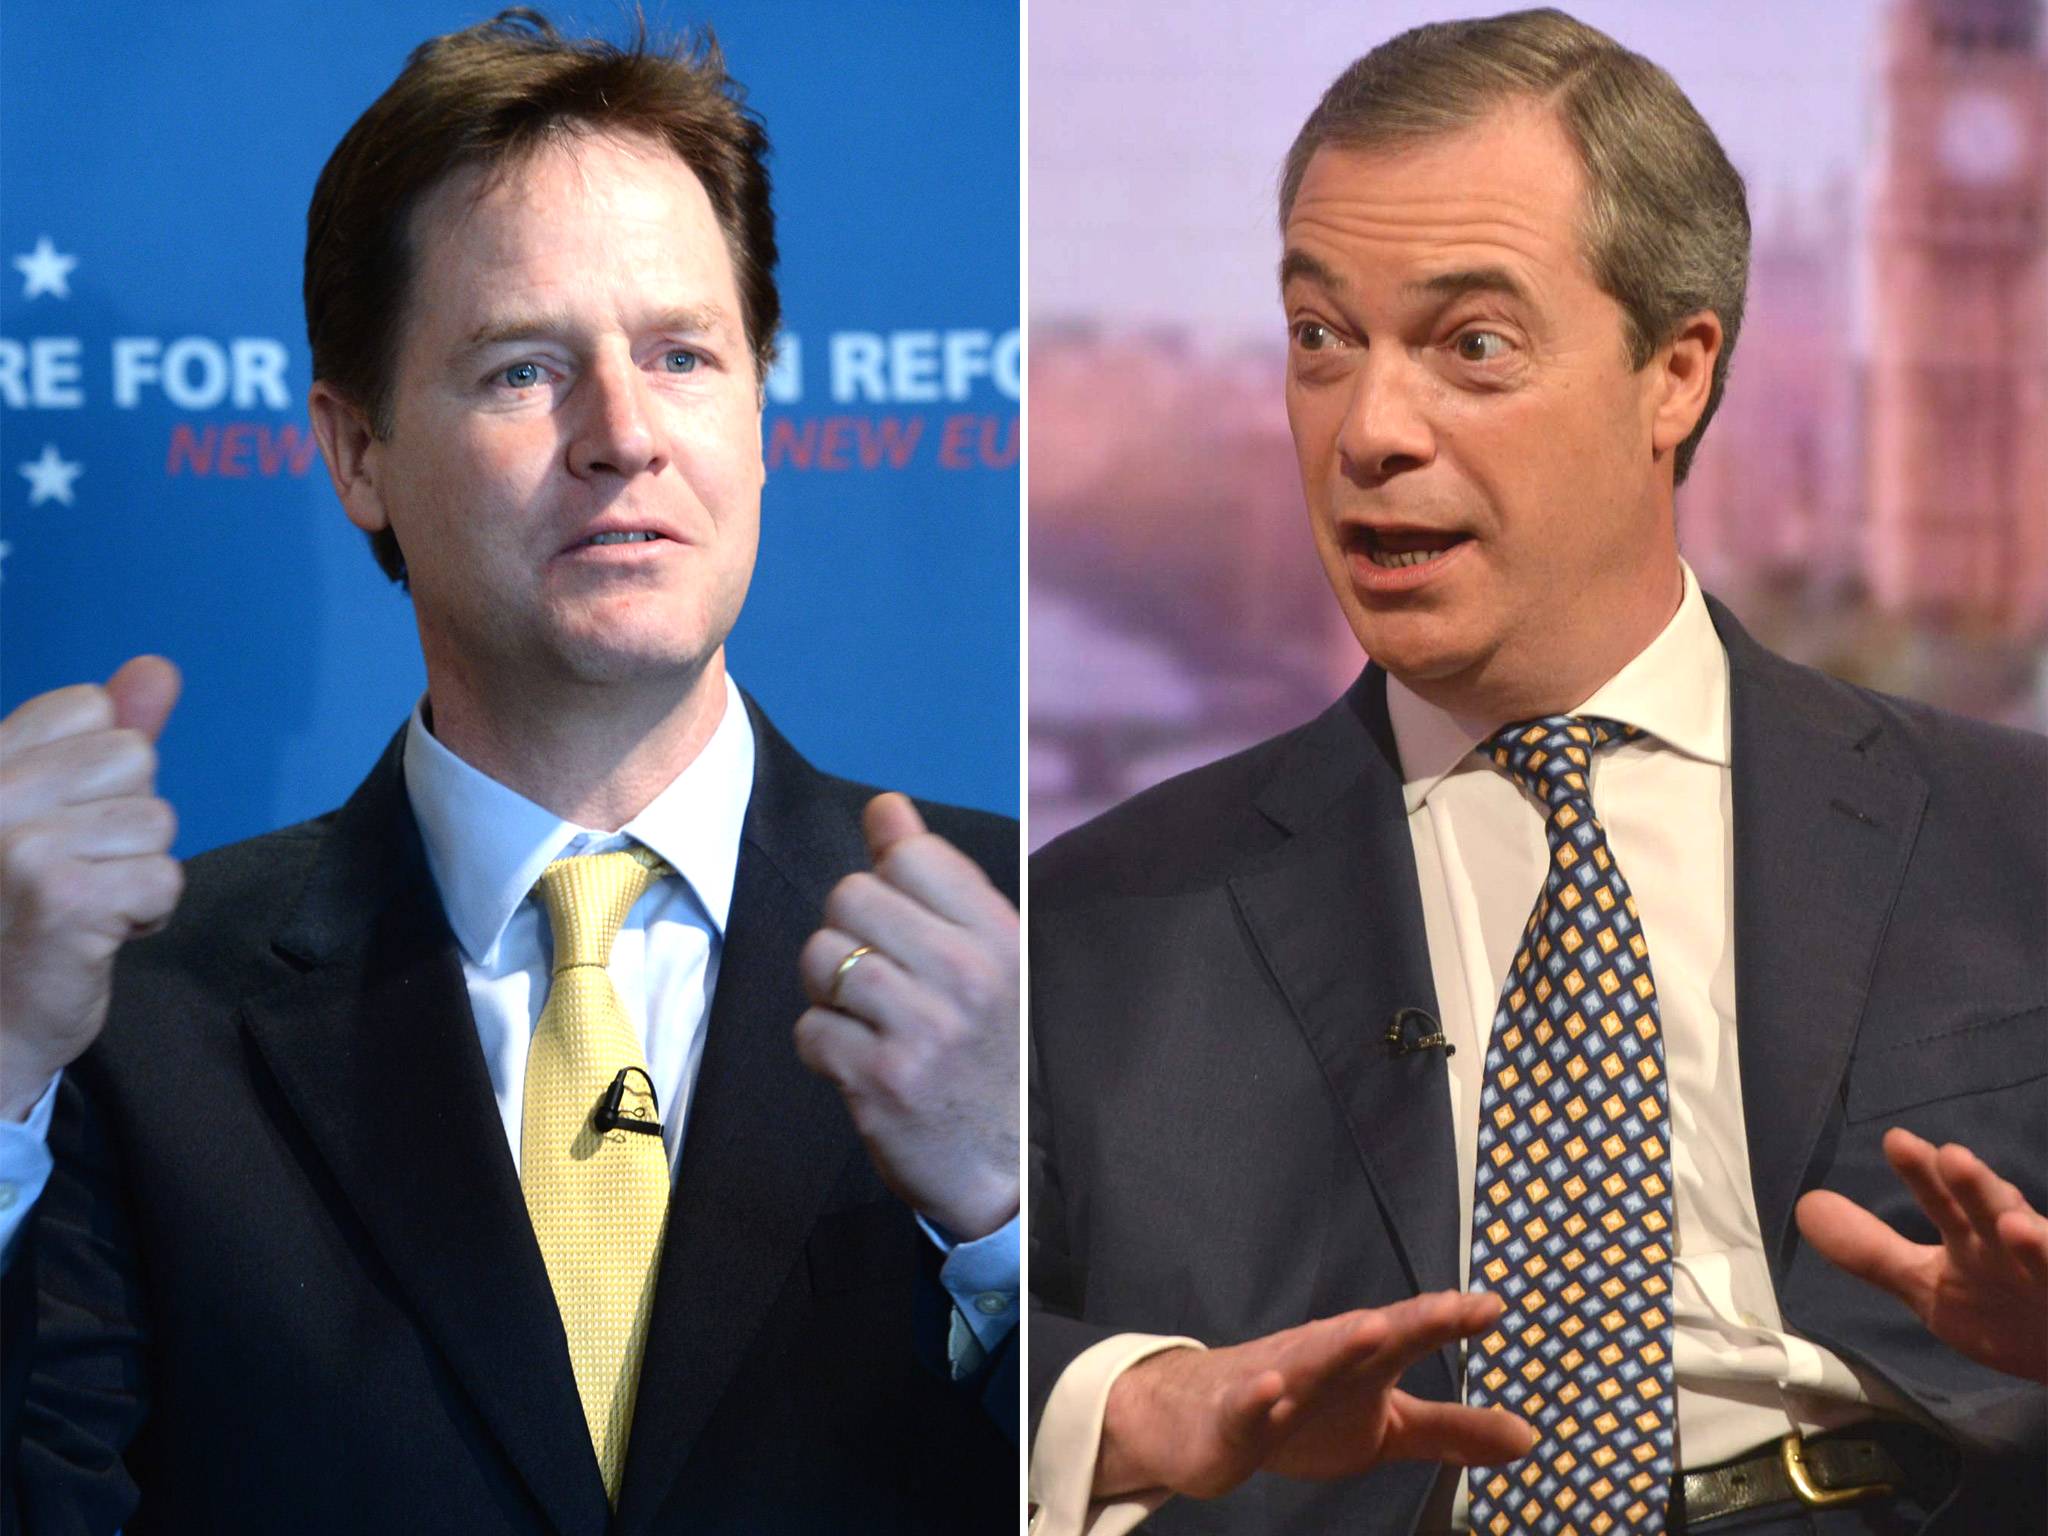 Nick Clegg and Nigel Farage have already begun the verbal sparring